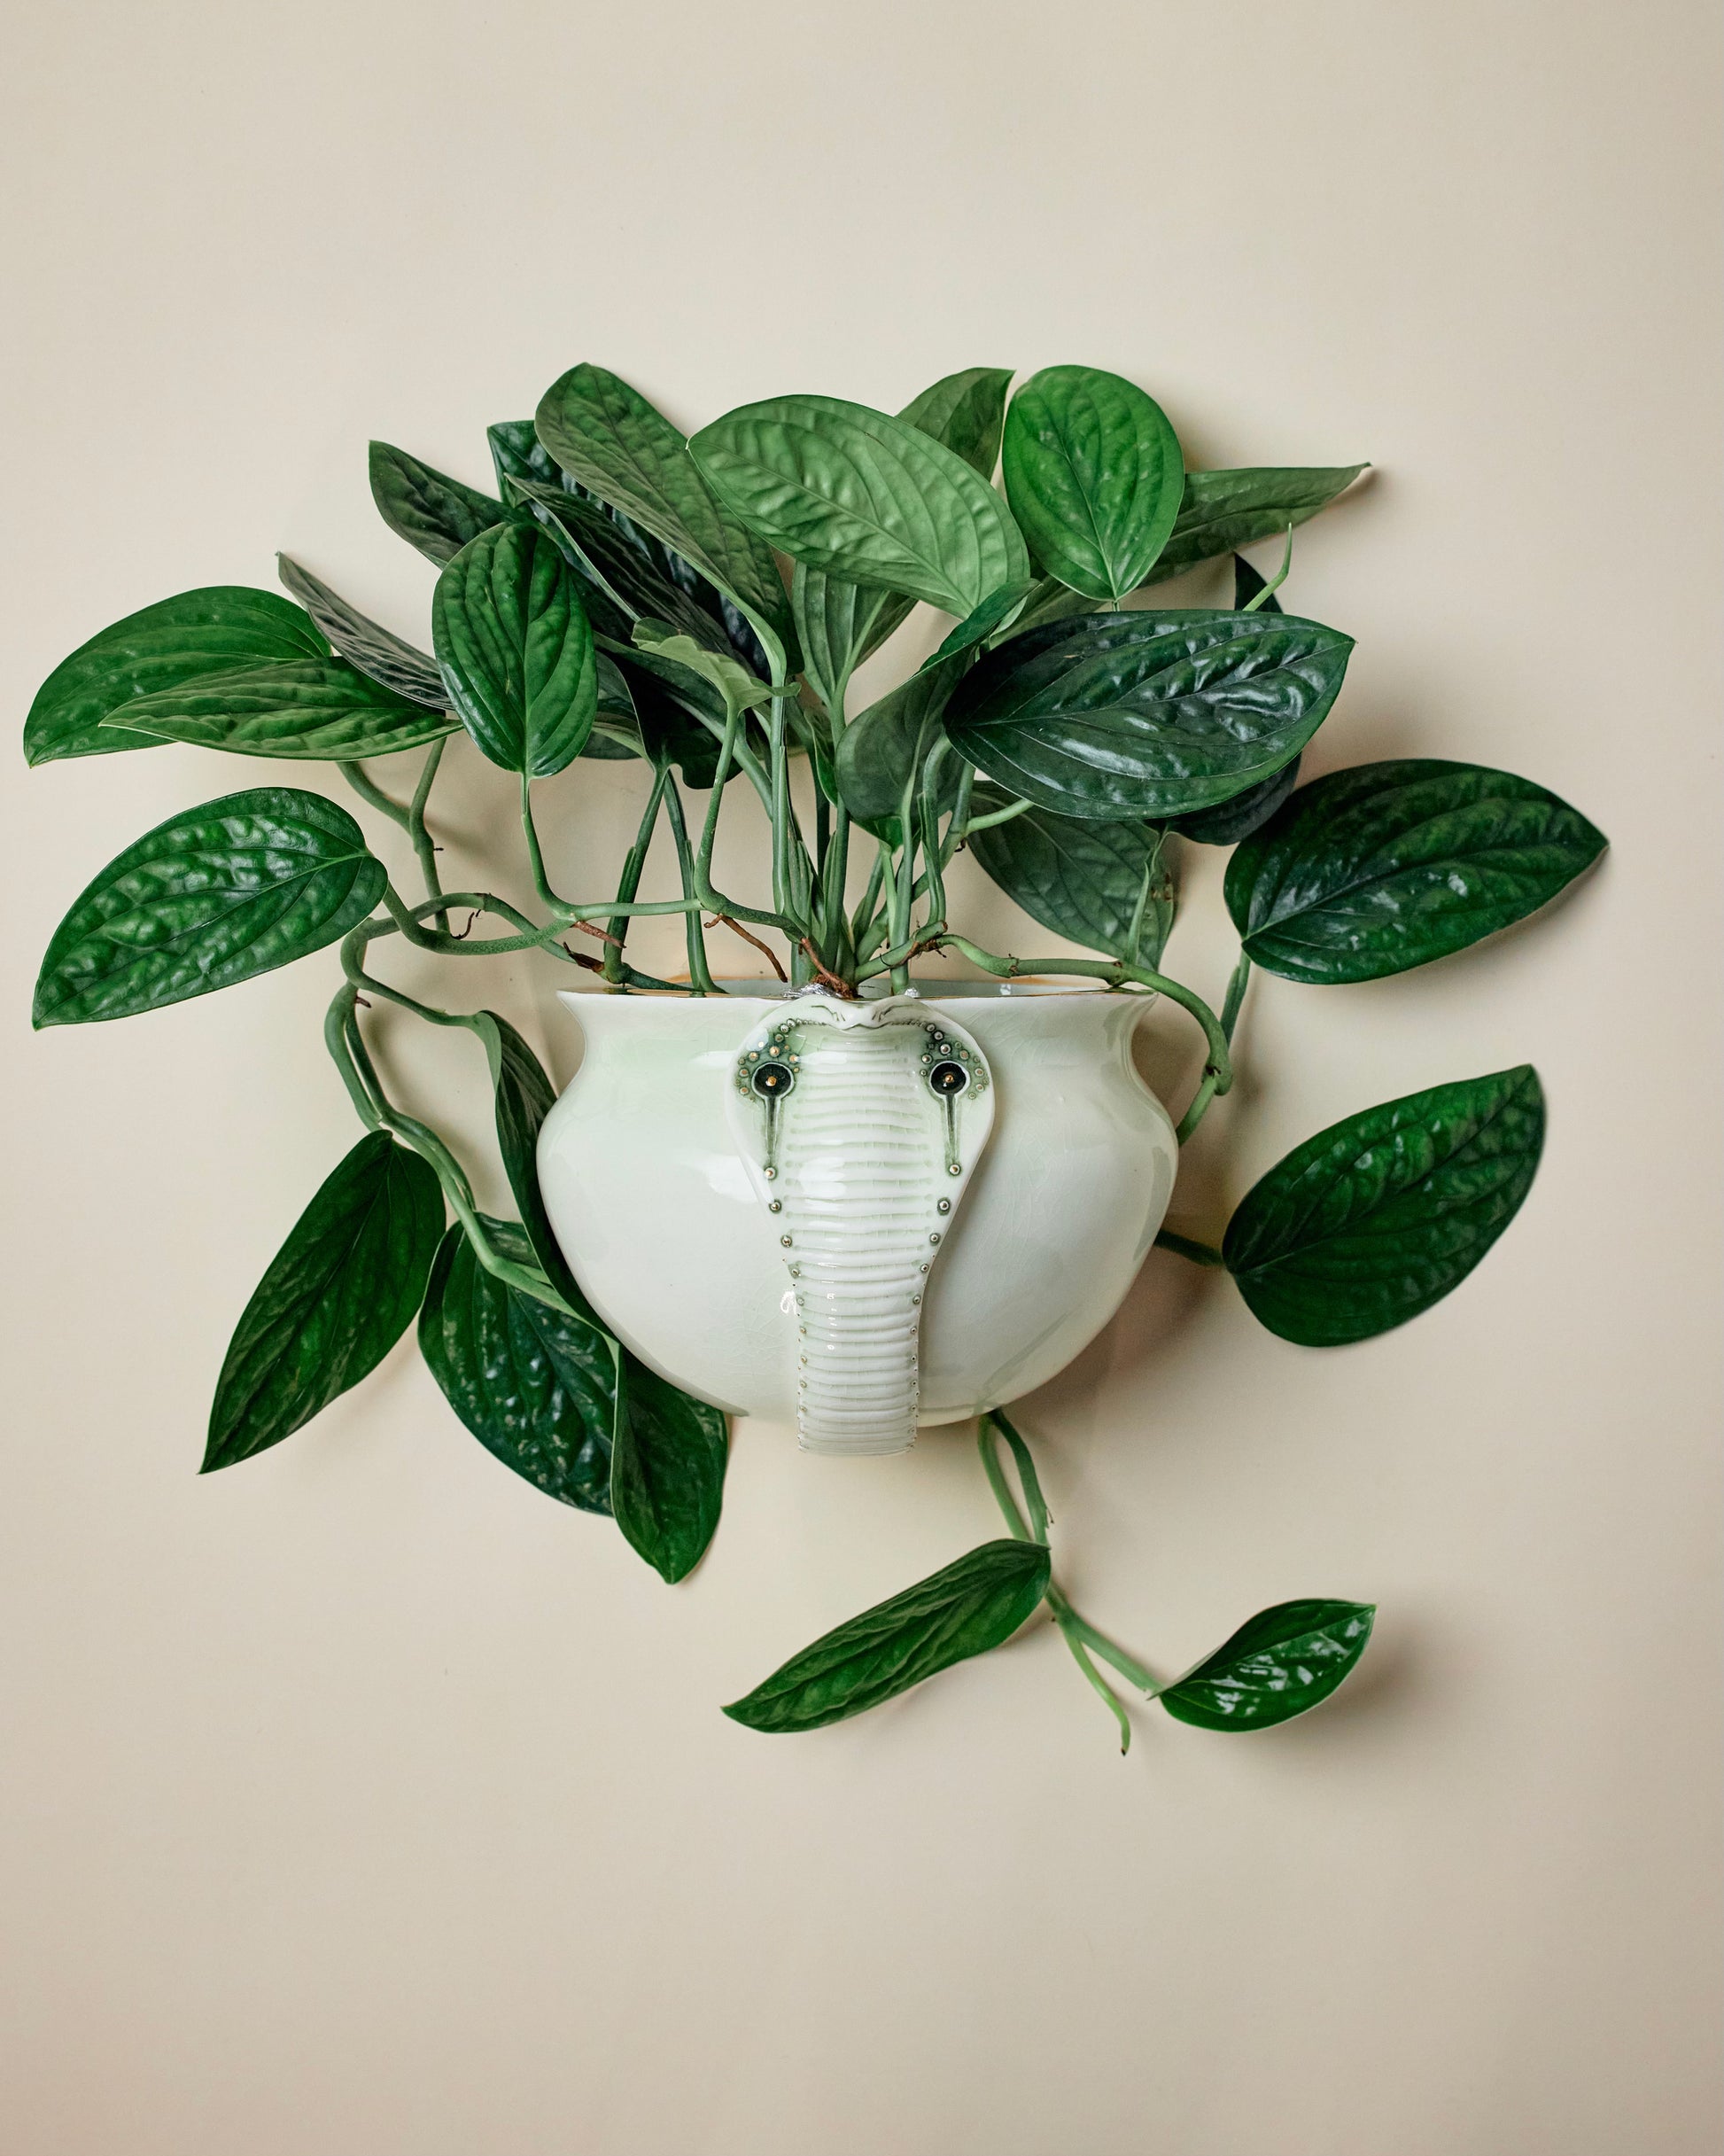 Snake Planeter 1 - Hand crafted Porcelain Home Planter with Snake Detail